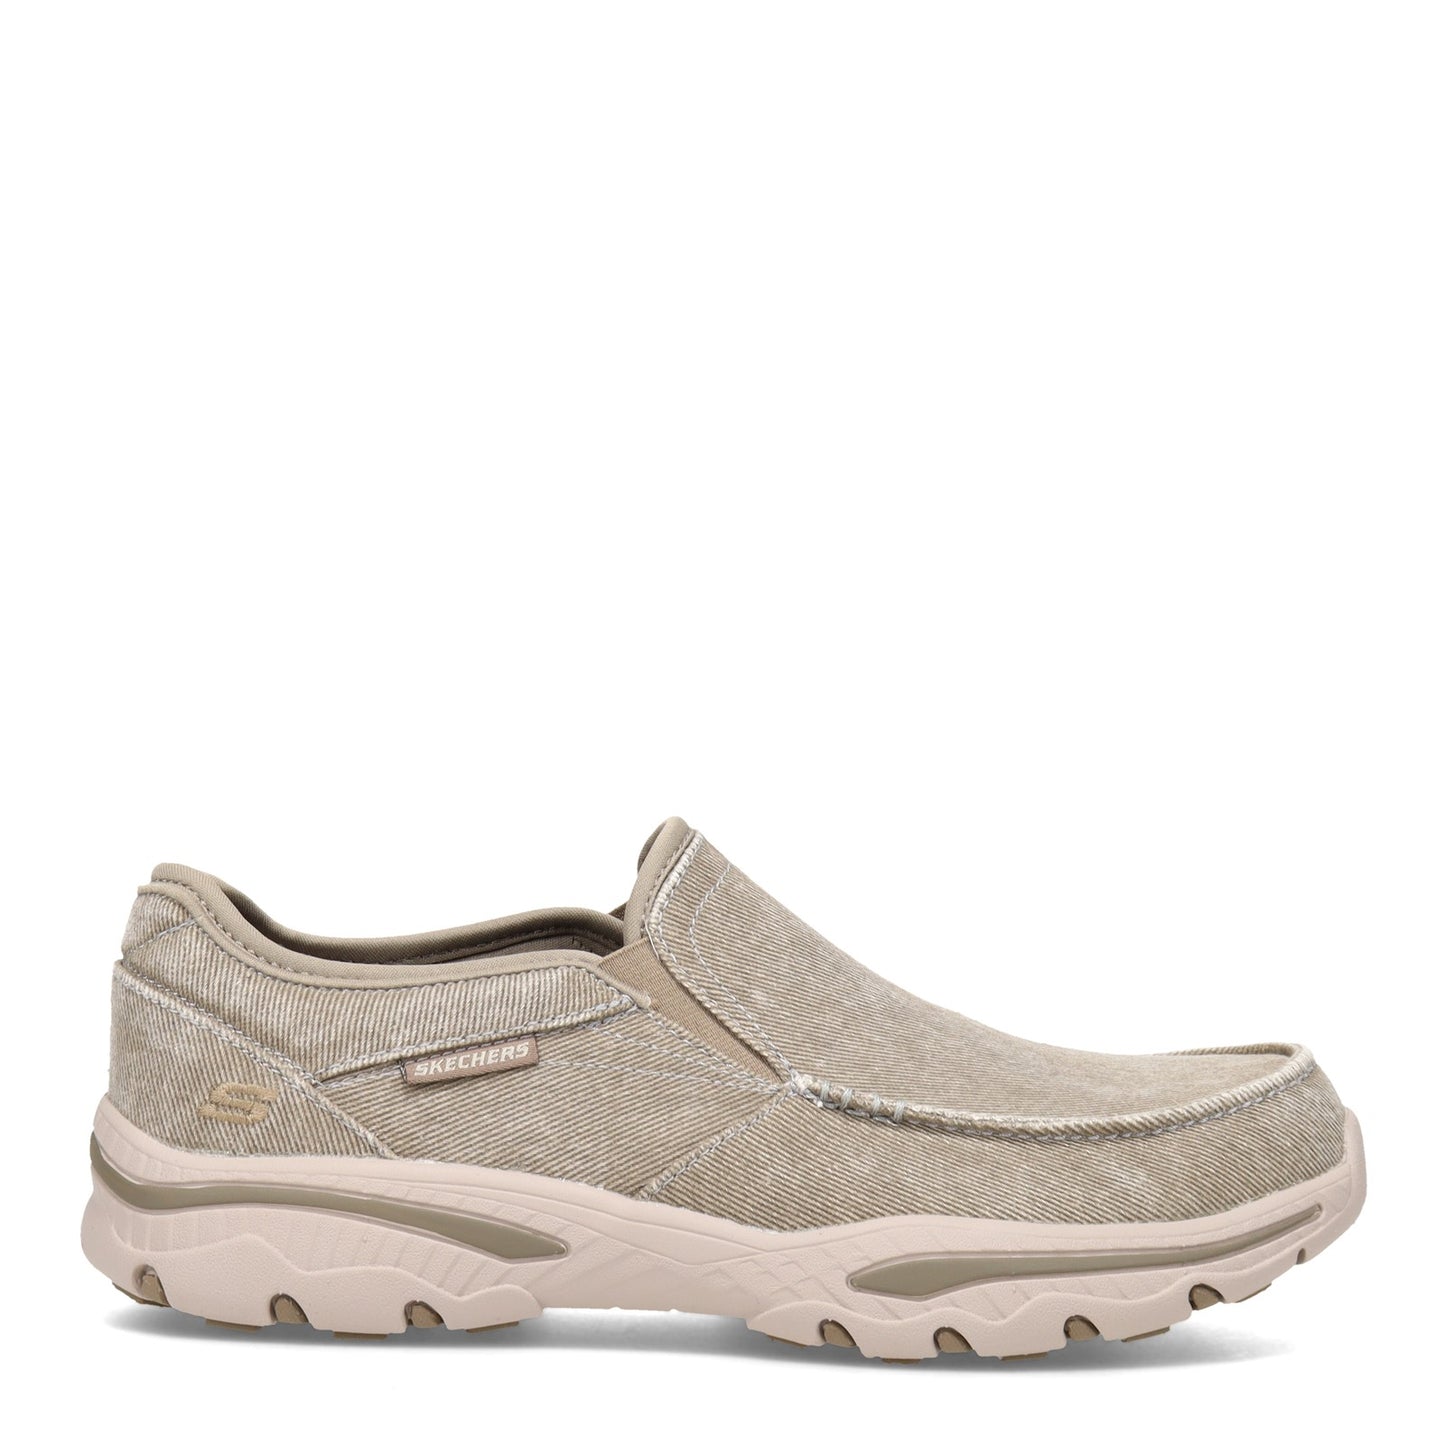 Peltz Shoes  Men's Skechers Relaxed Fit Creston Moseco Slip-On - Wide Width TAUPE 65355EWW-TPE